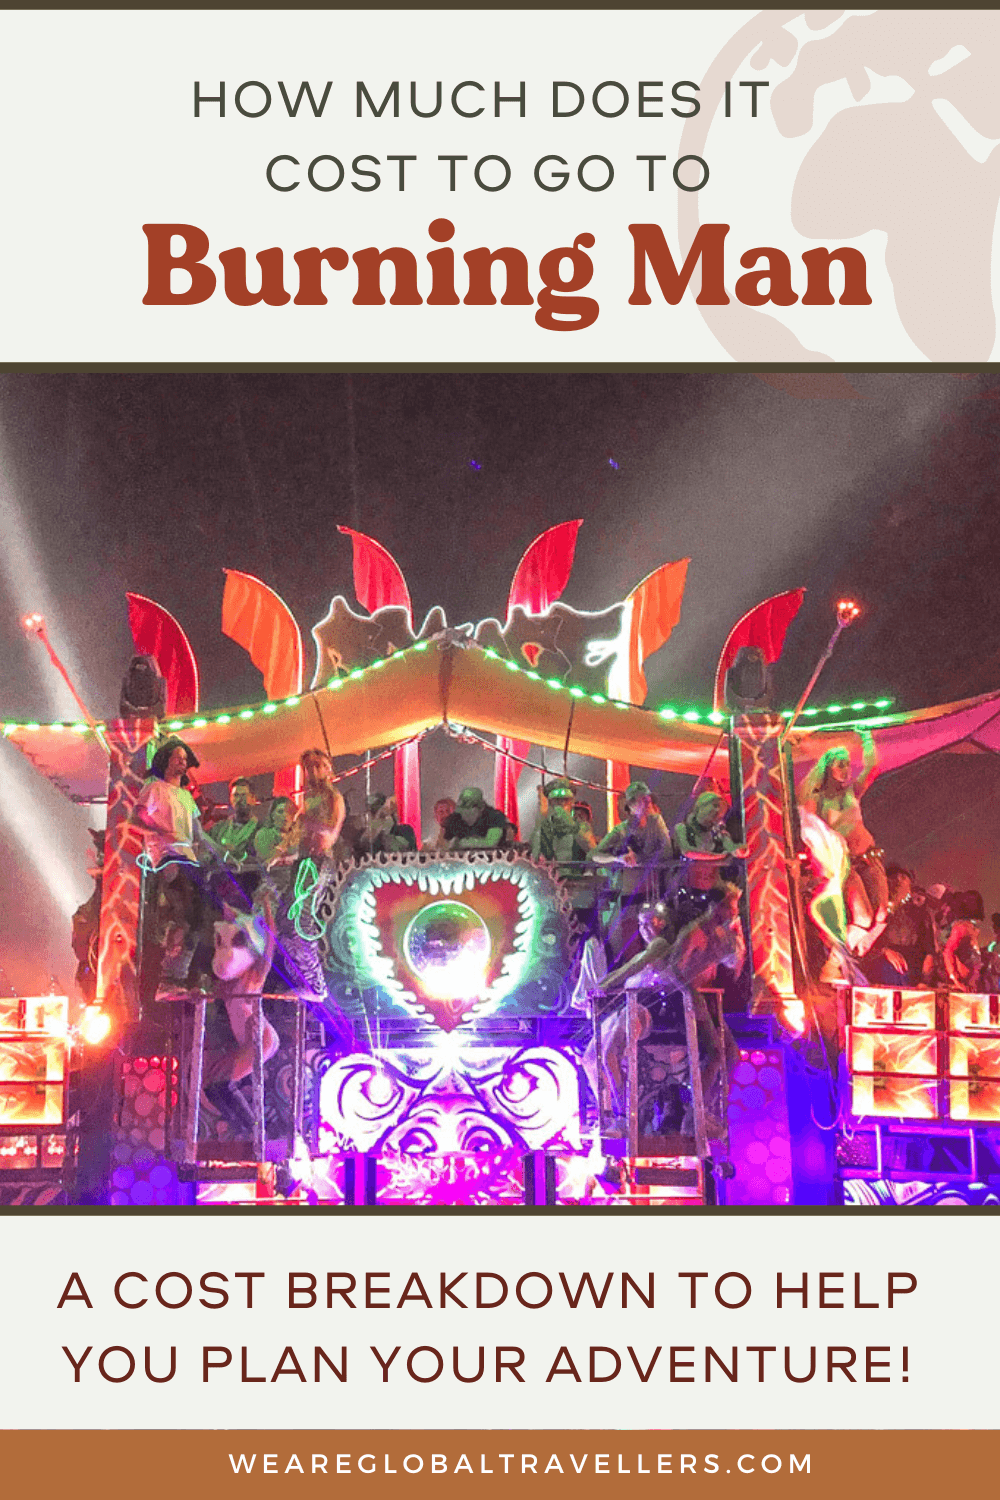 How much does it cost to go to Burning Man? A cost breakdown